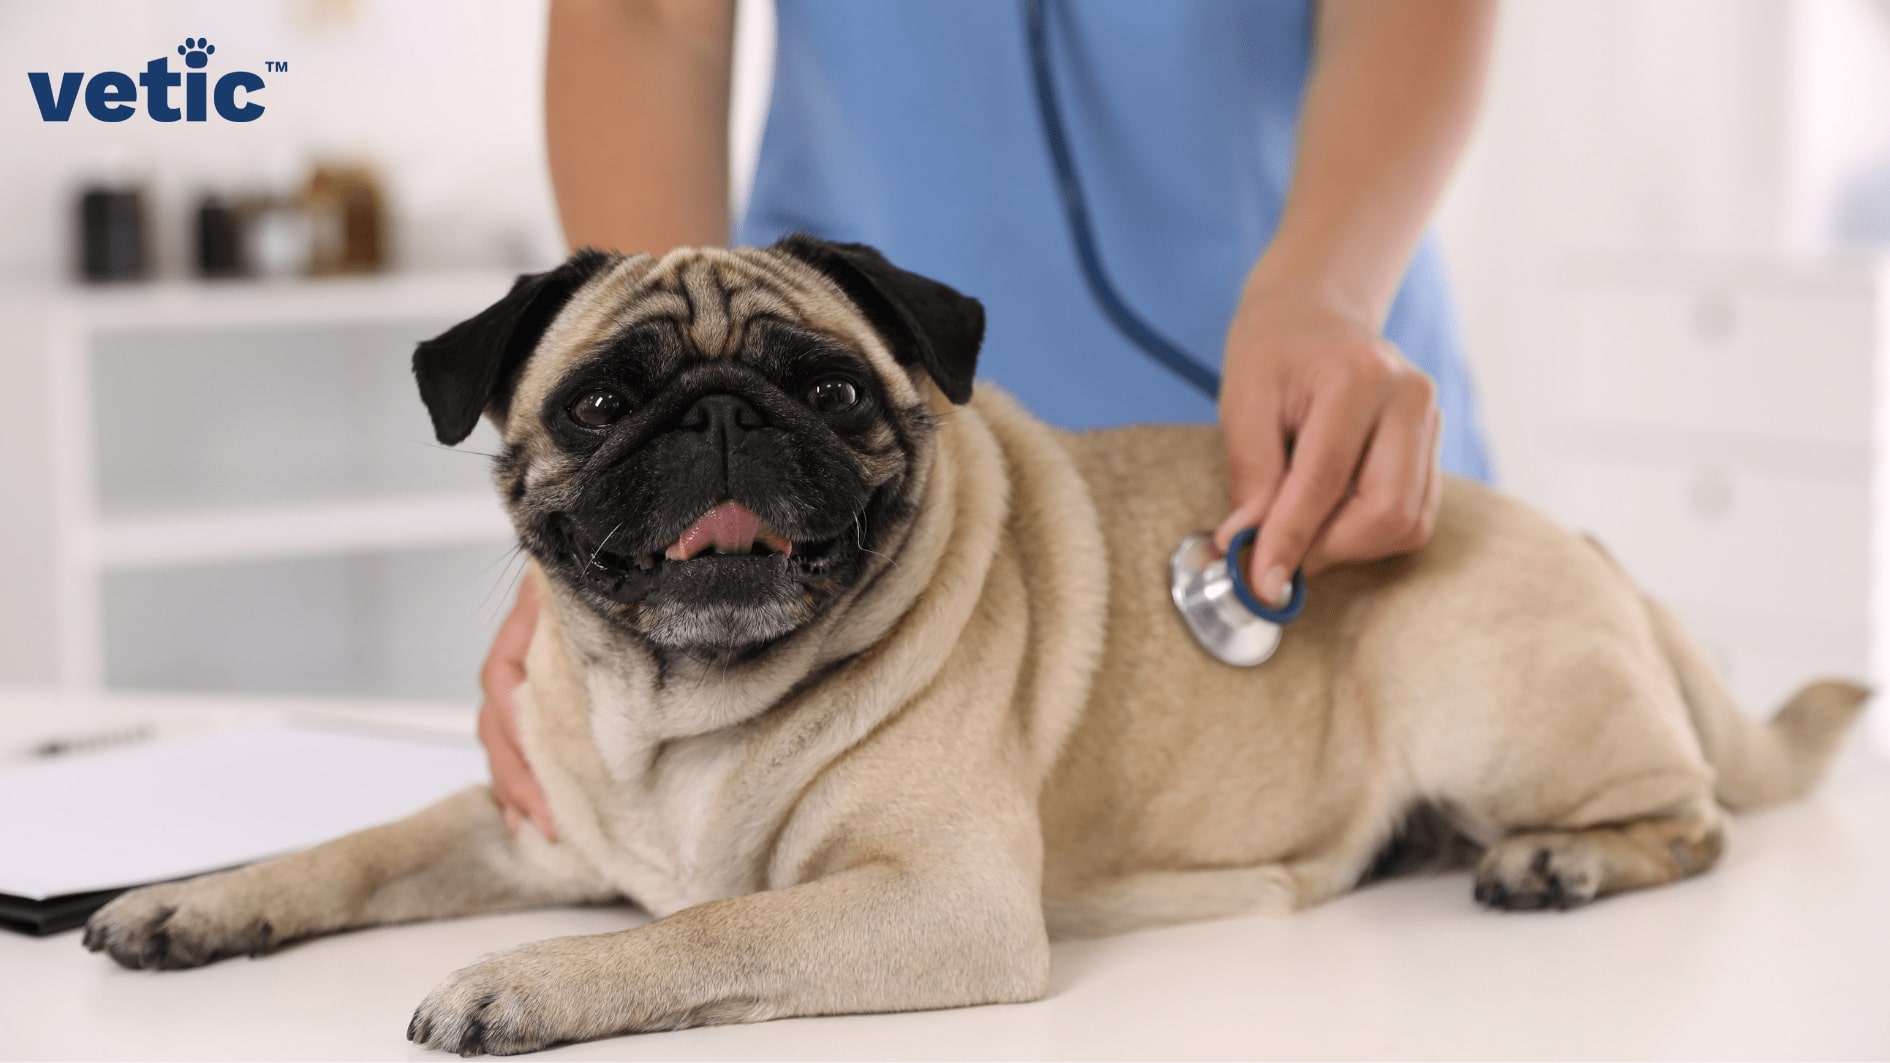 fat pug being checked up by the vet with a stethoscope